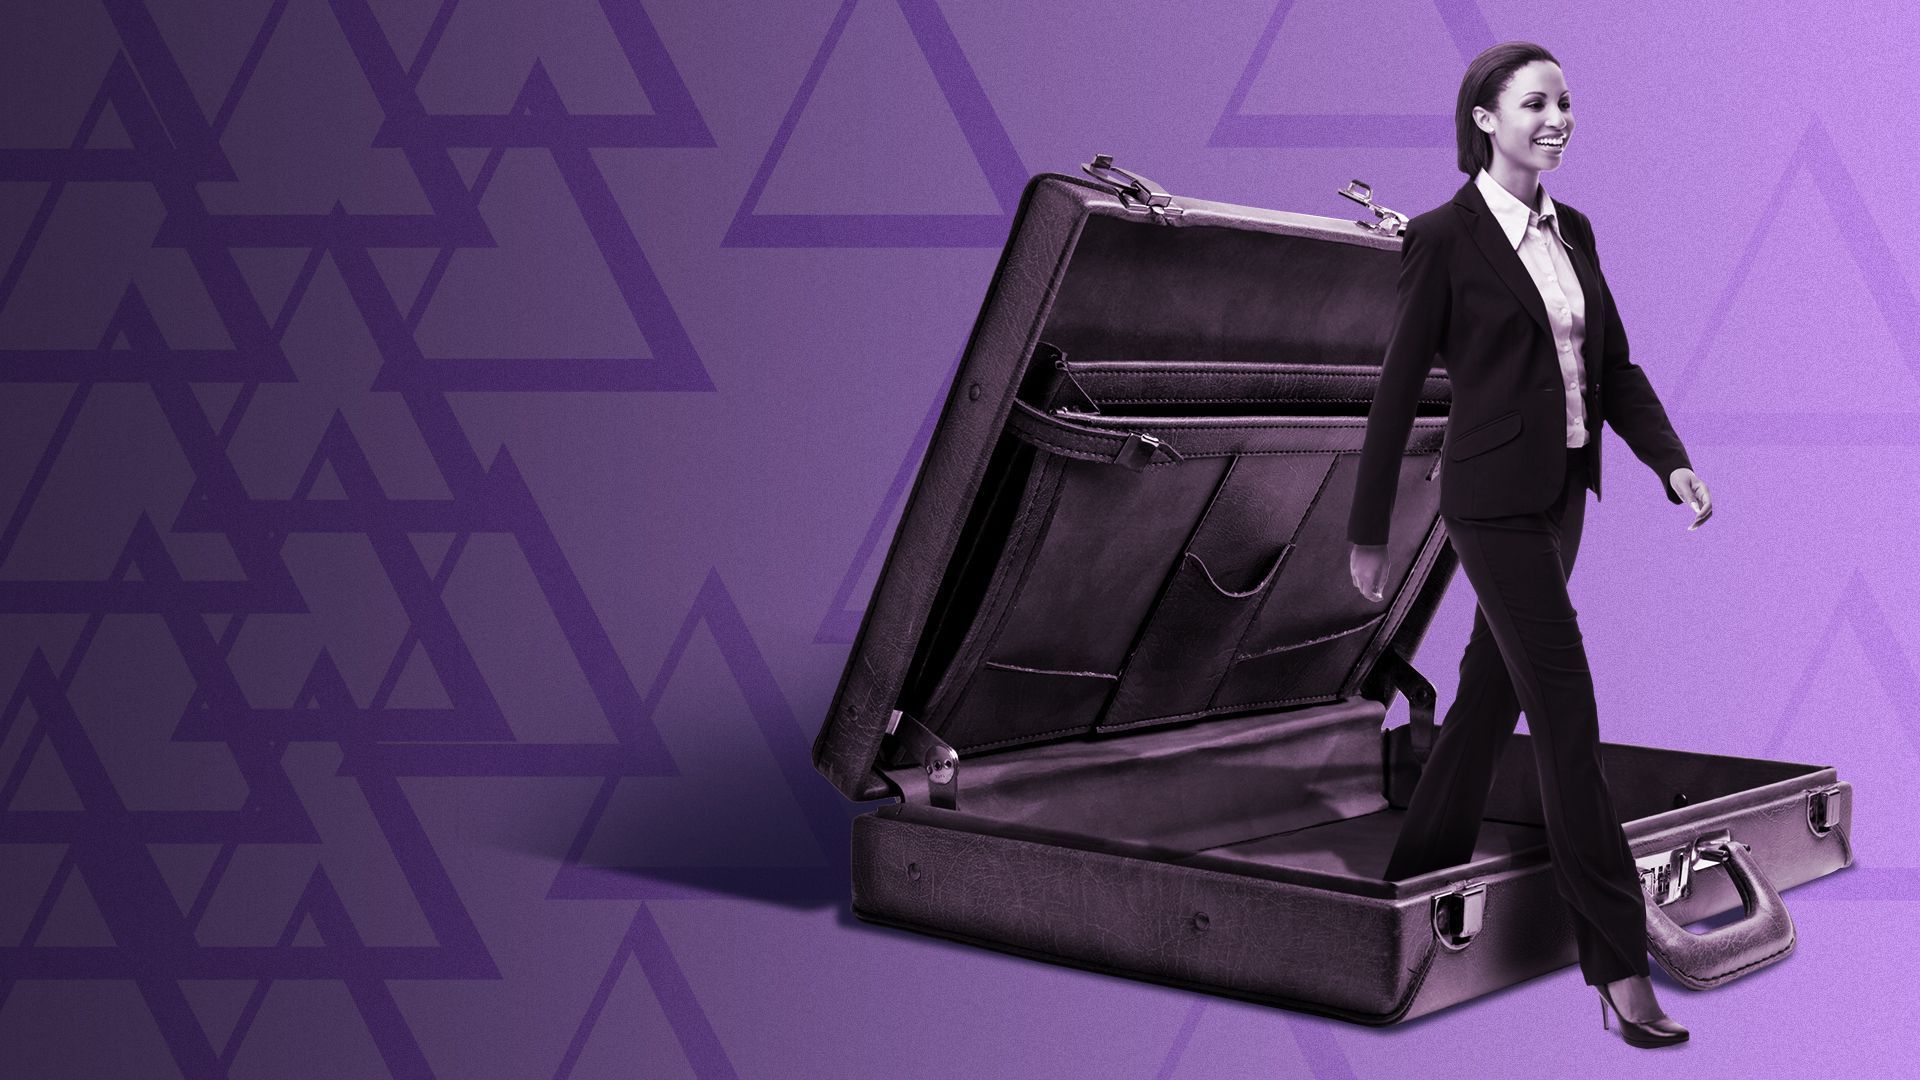 Illustration of a woman wearing pantsuit walking out of a briefcase.